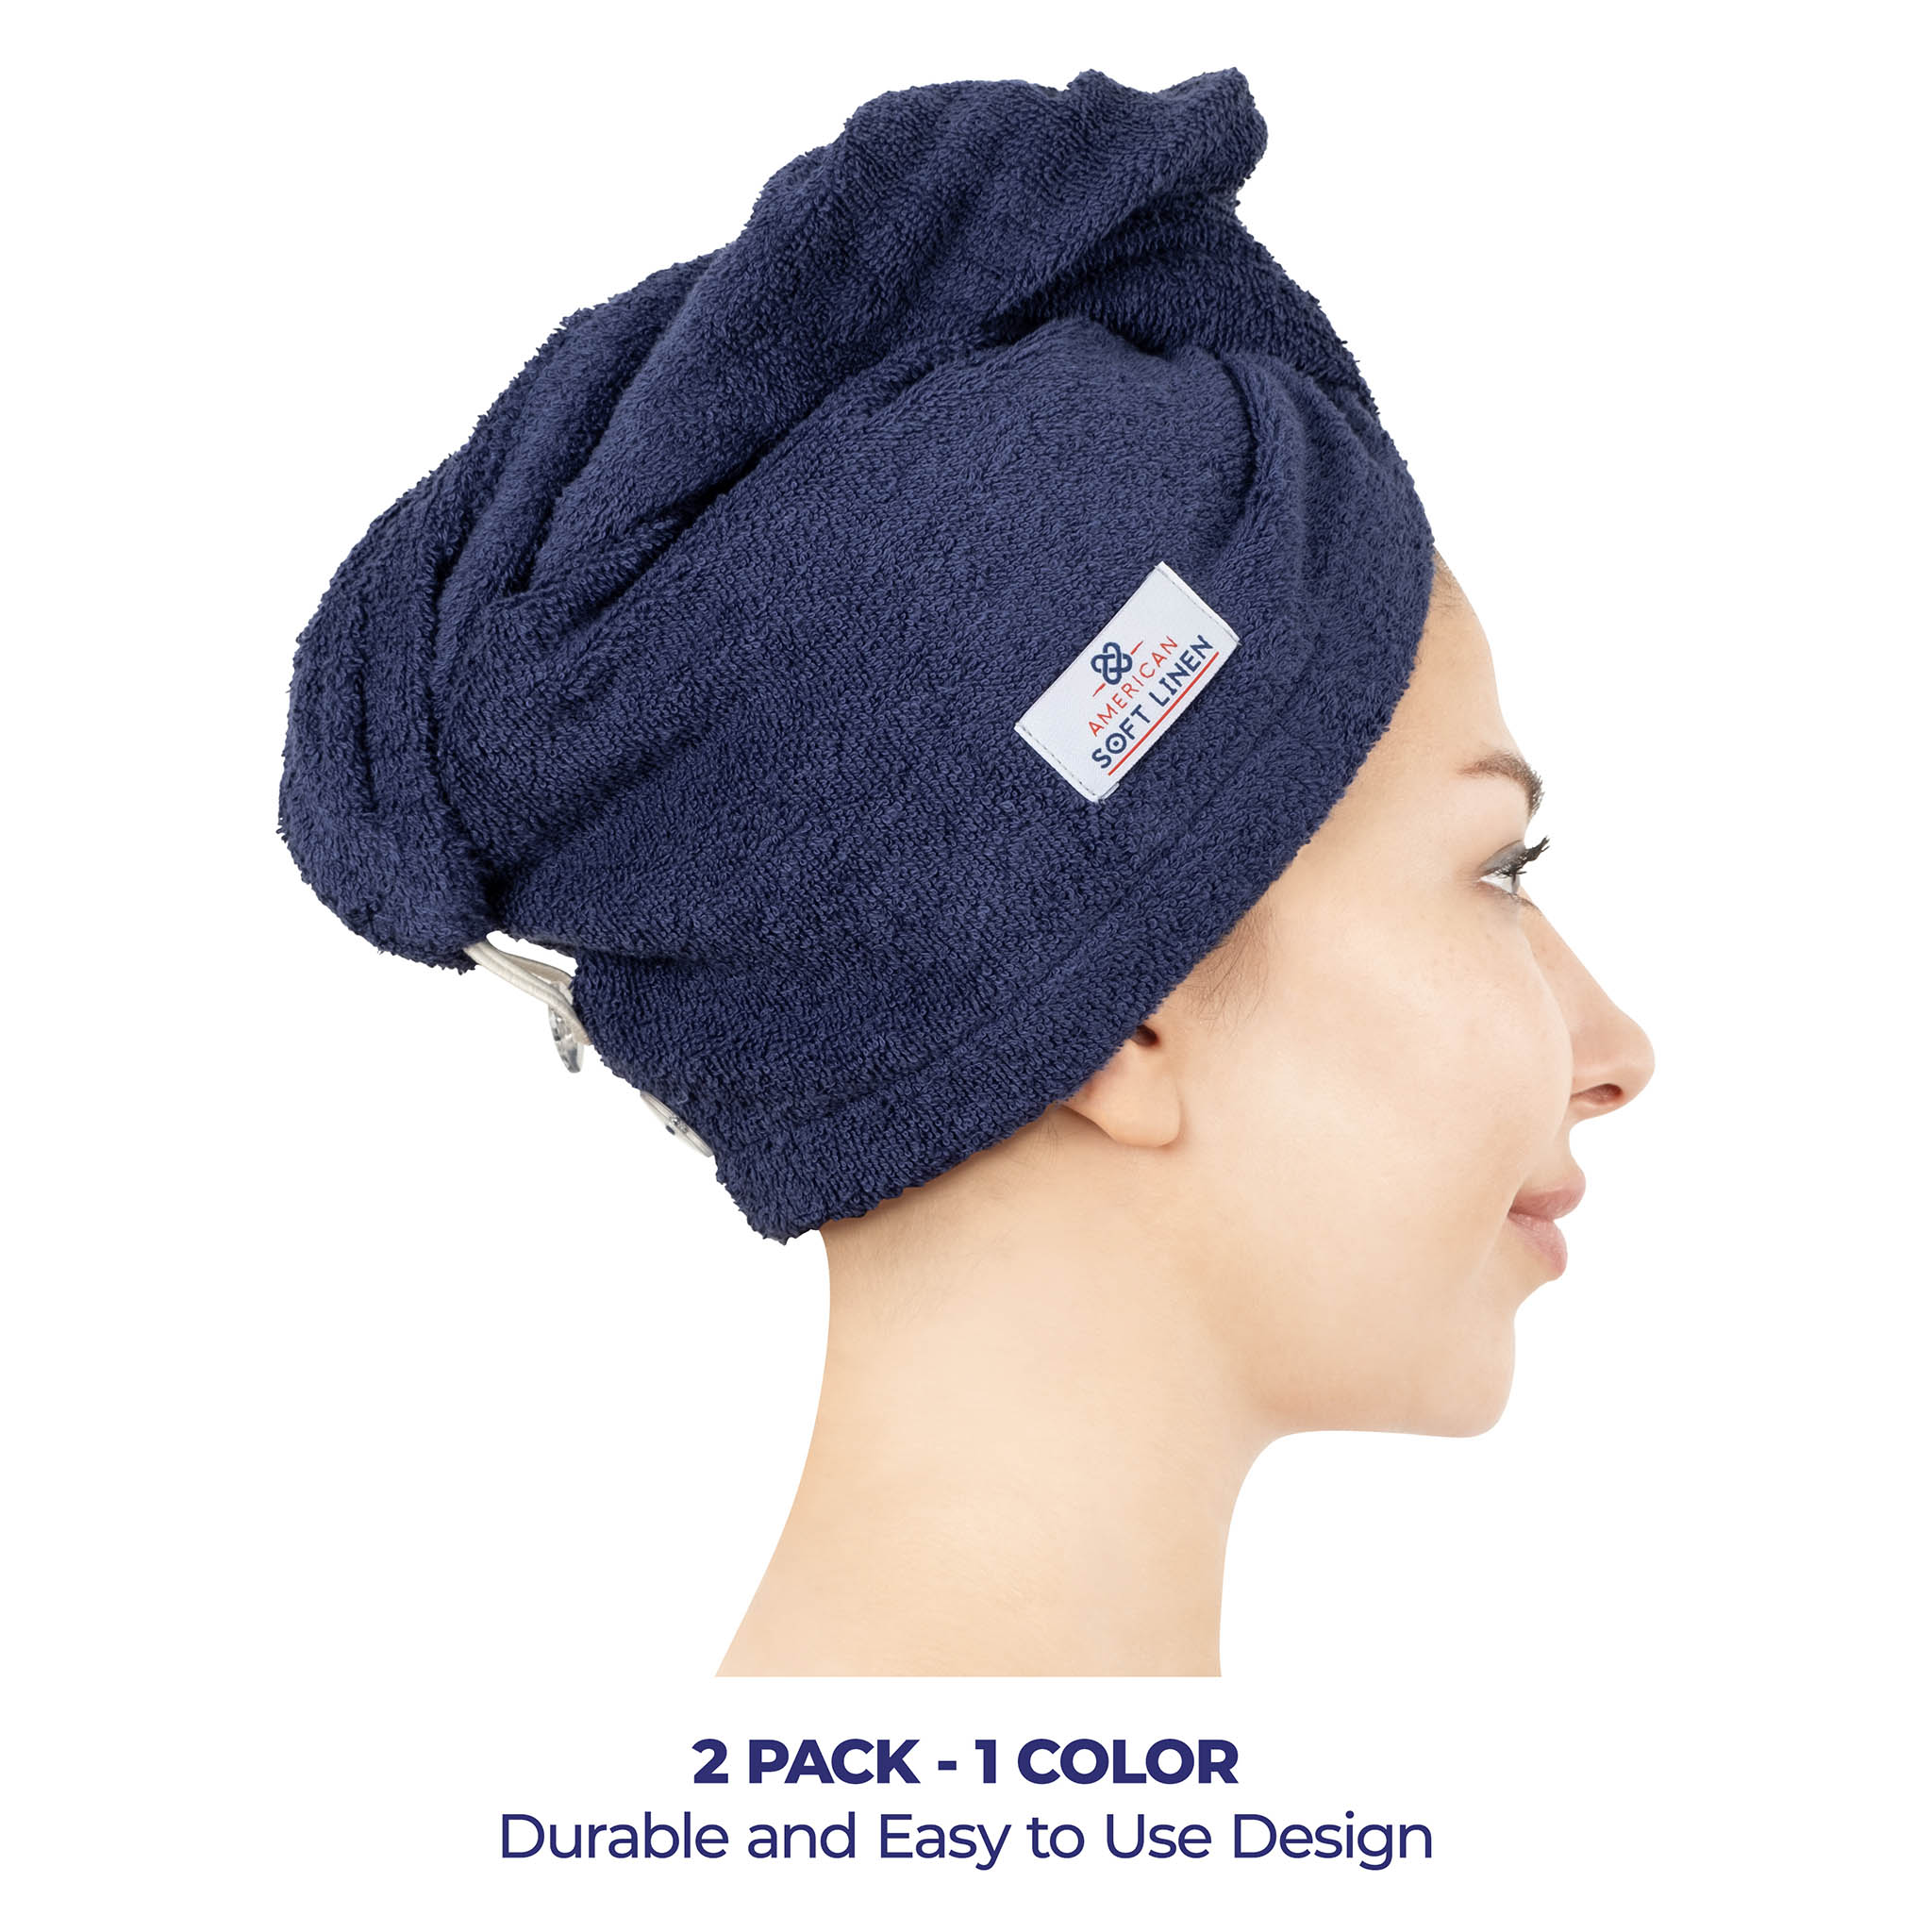 American Soft Linen 100% Cotton Hair Drying Towels for Women 2 pack 75 set case pack navy blue-2